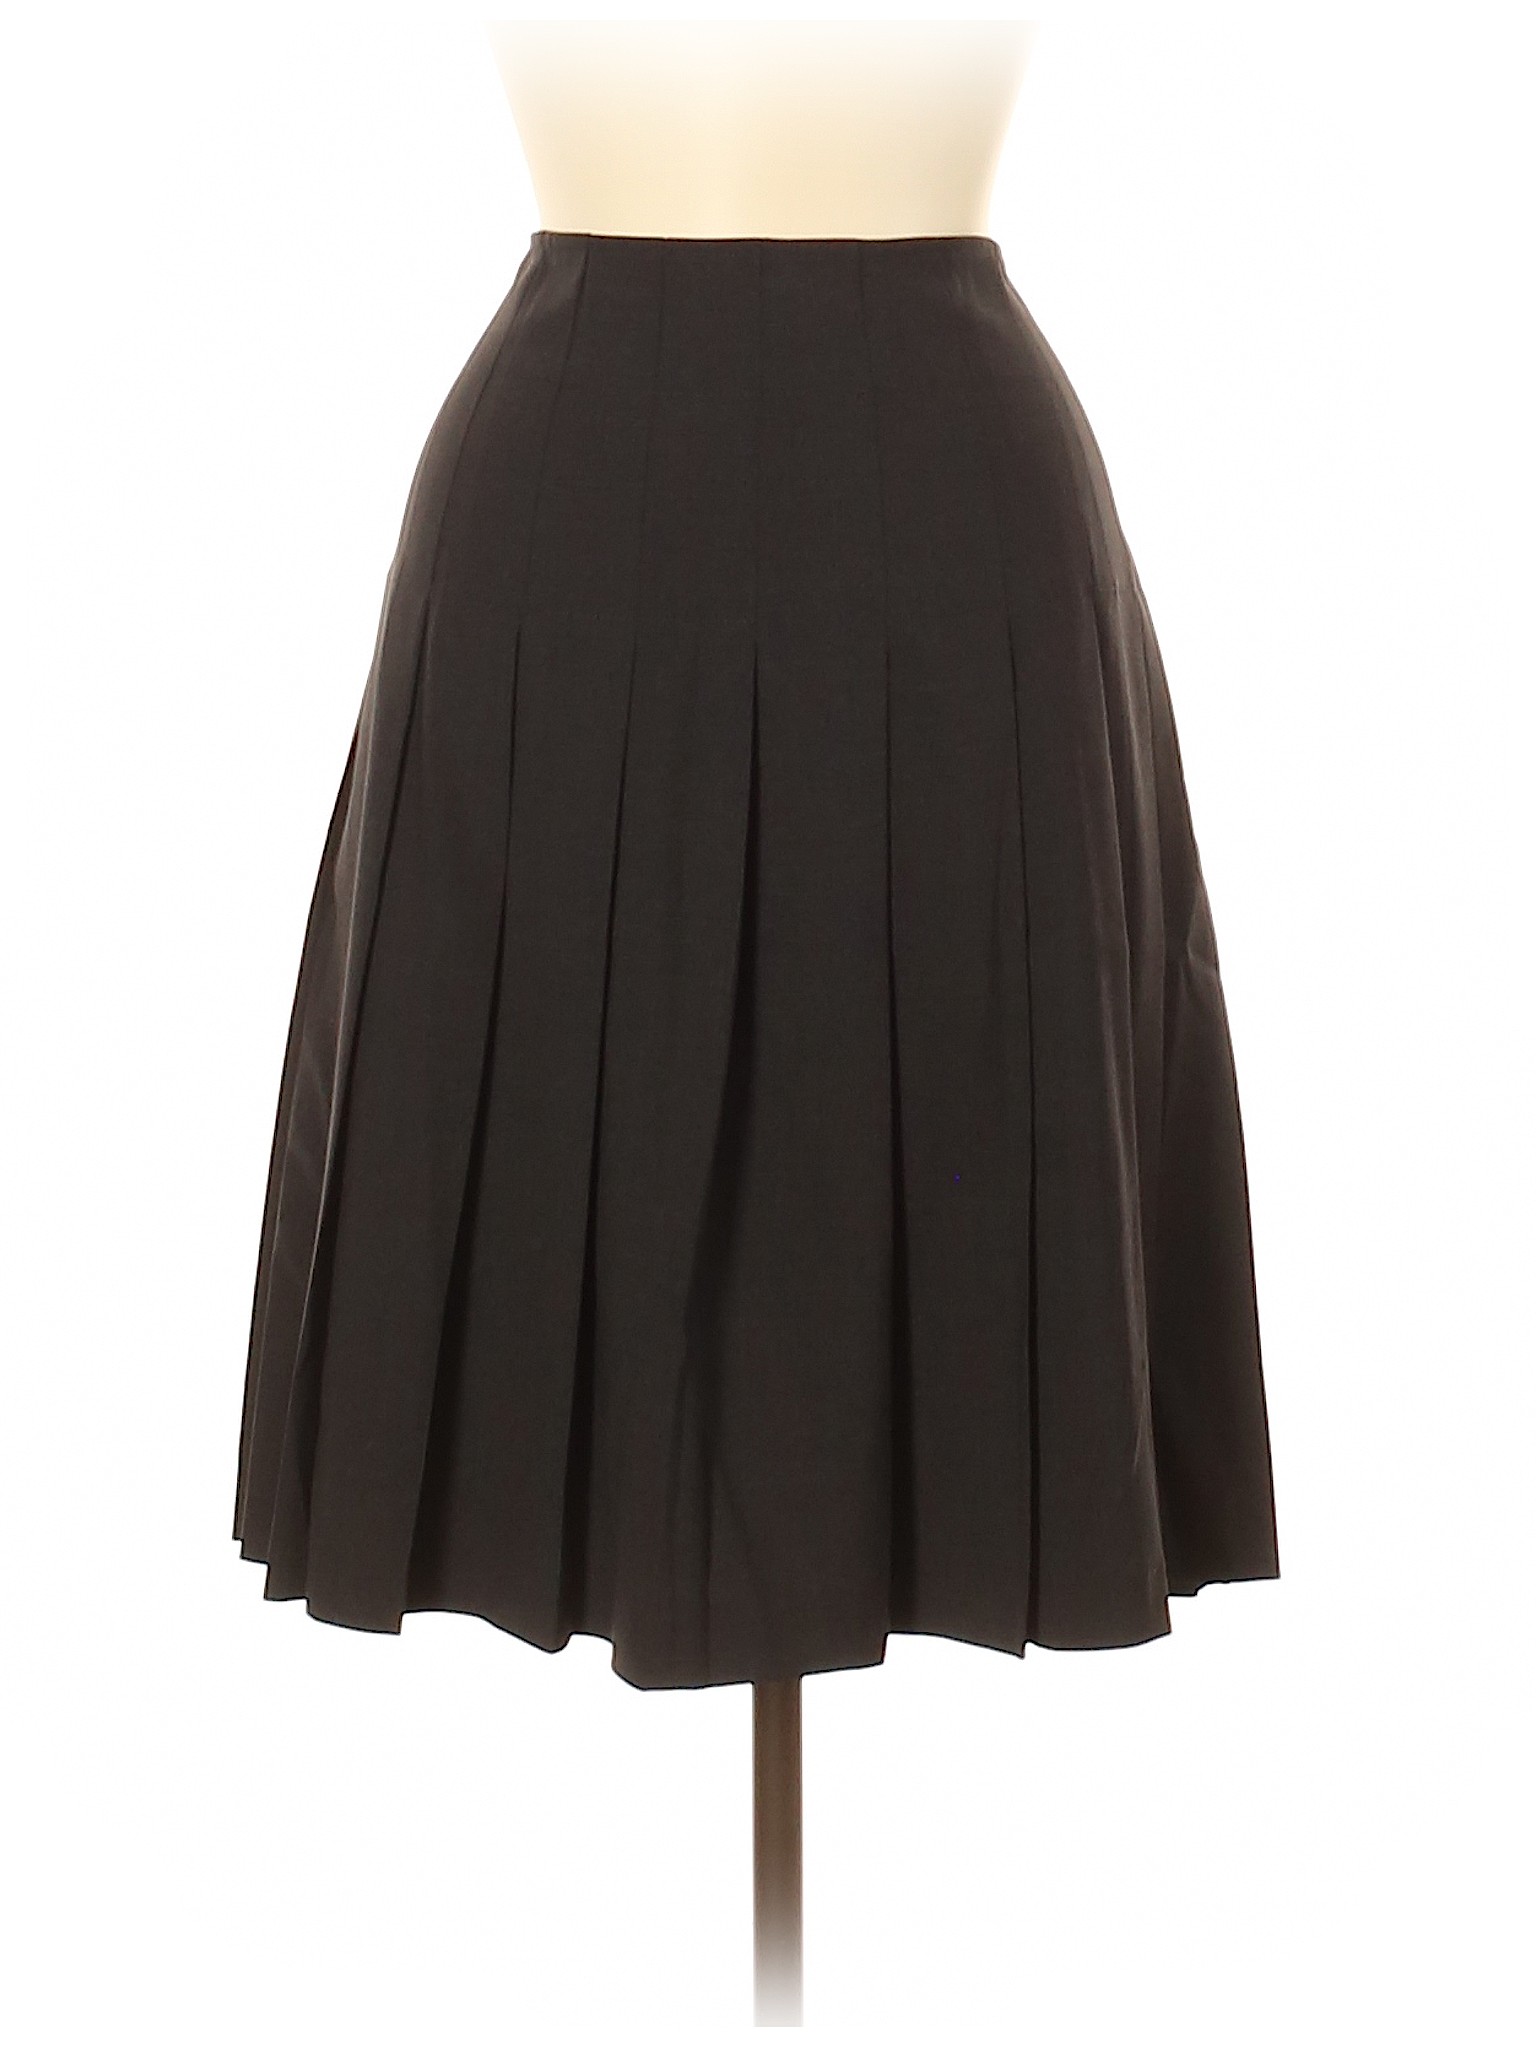 Theory Solid Black Wool Skirt Size 8 - 85% off | thredUP